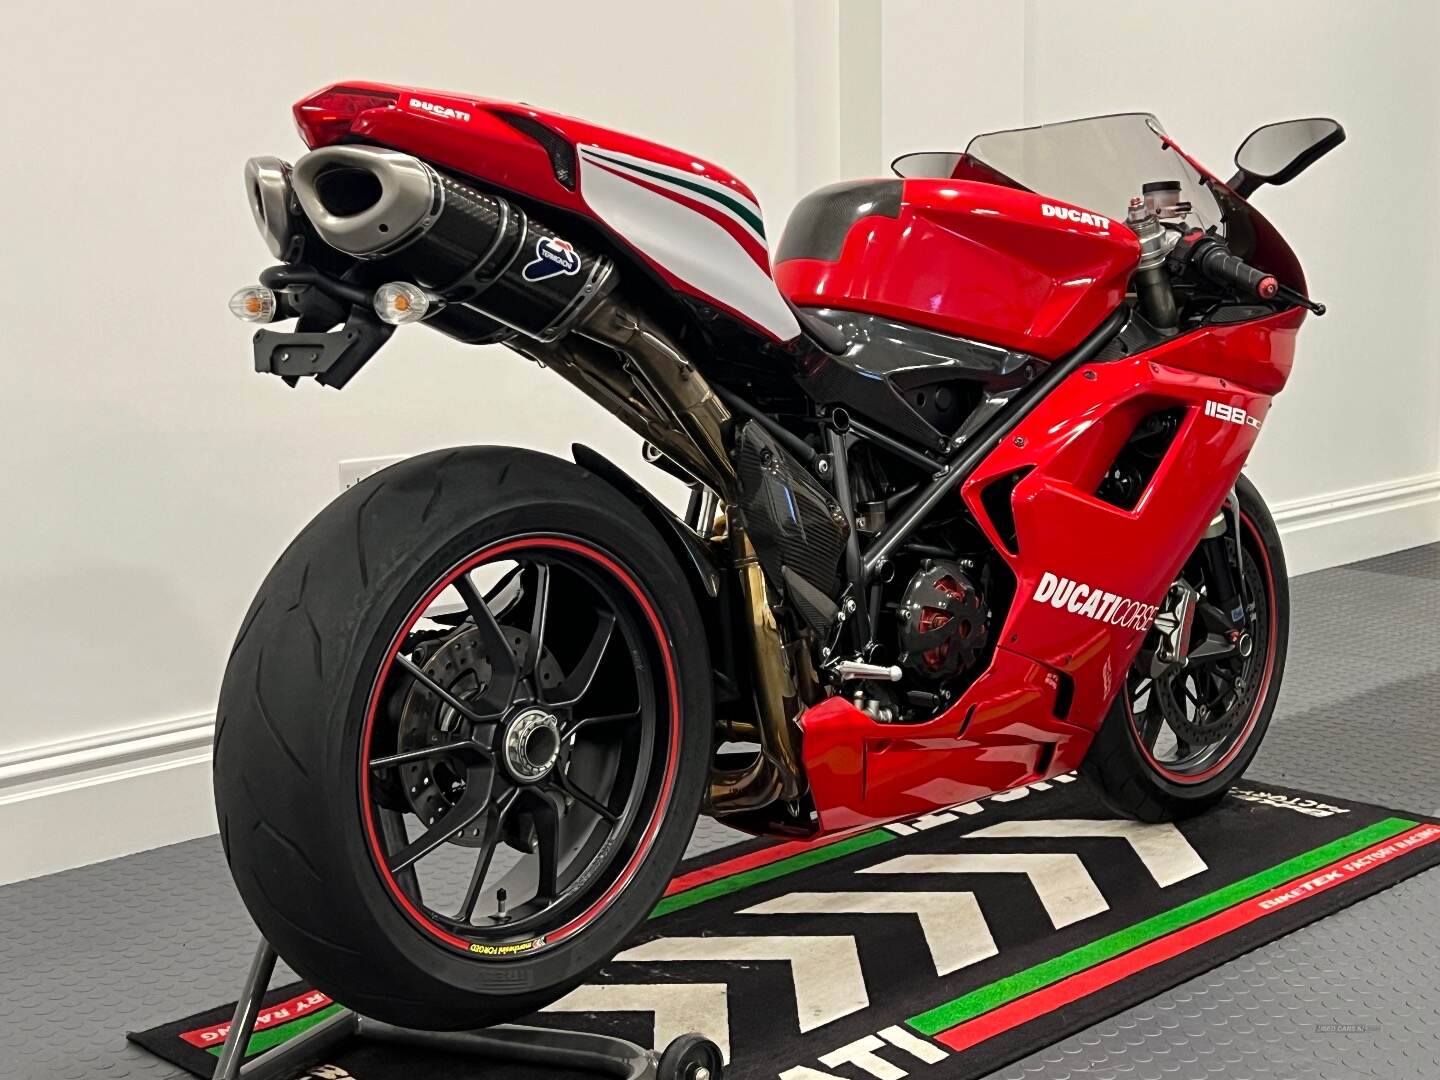 Ducati 1198 Termignoni exhaust system, lots of carbon etc in Down